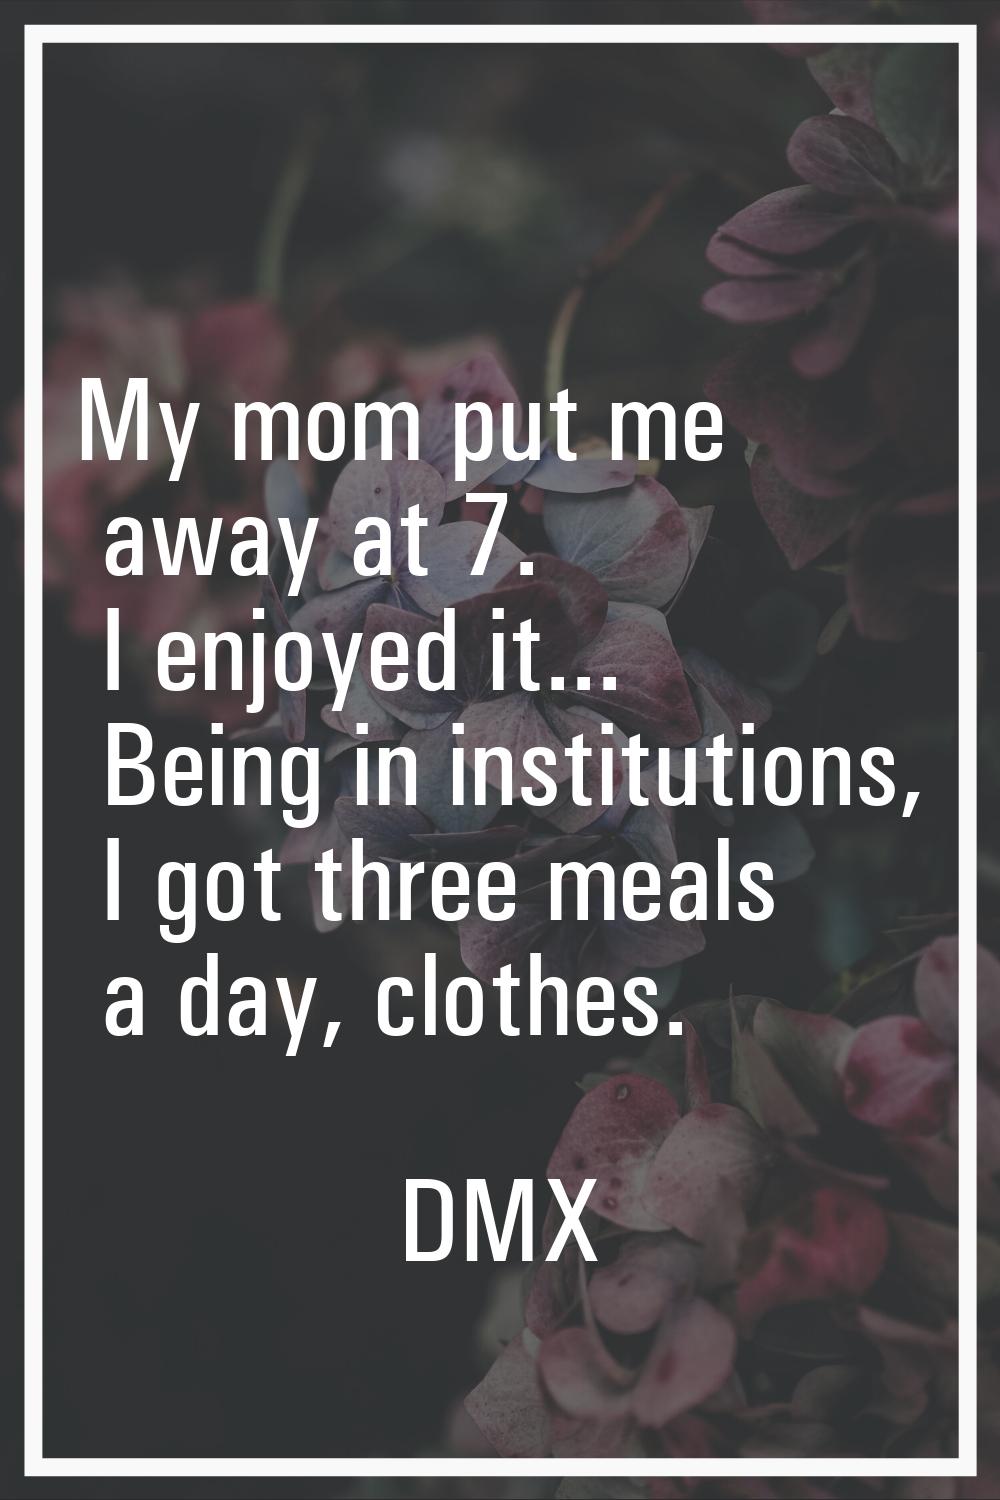 My mom put me away at 7. I enjoyed it... Being in institutions, I got three meals a day, clothes.